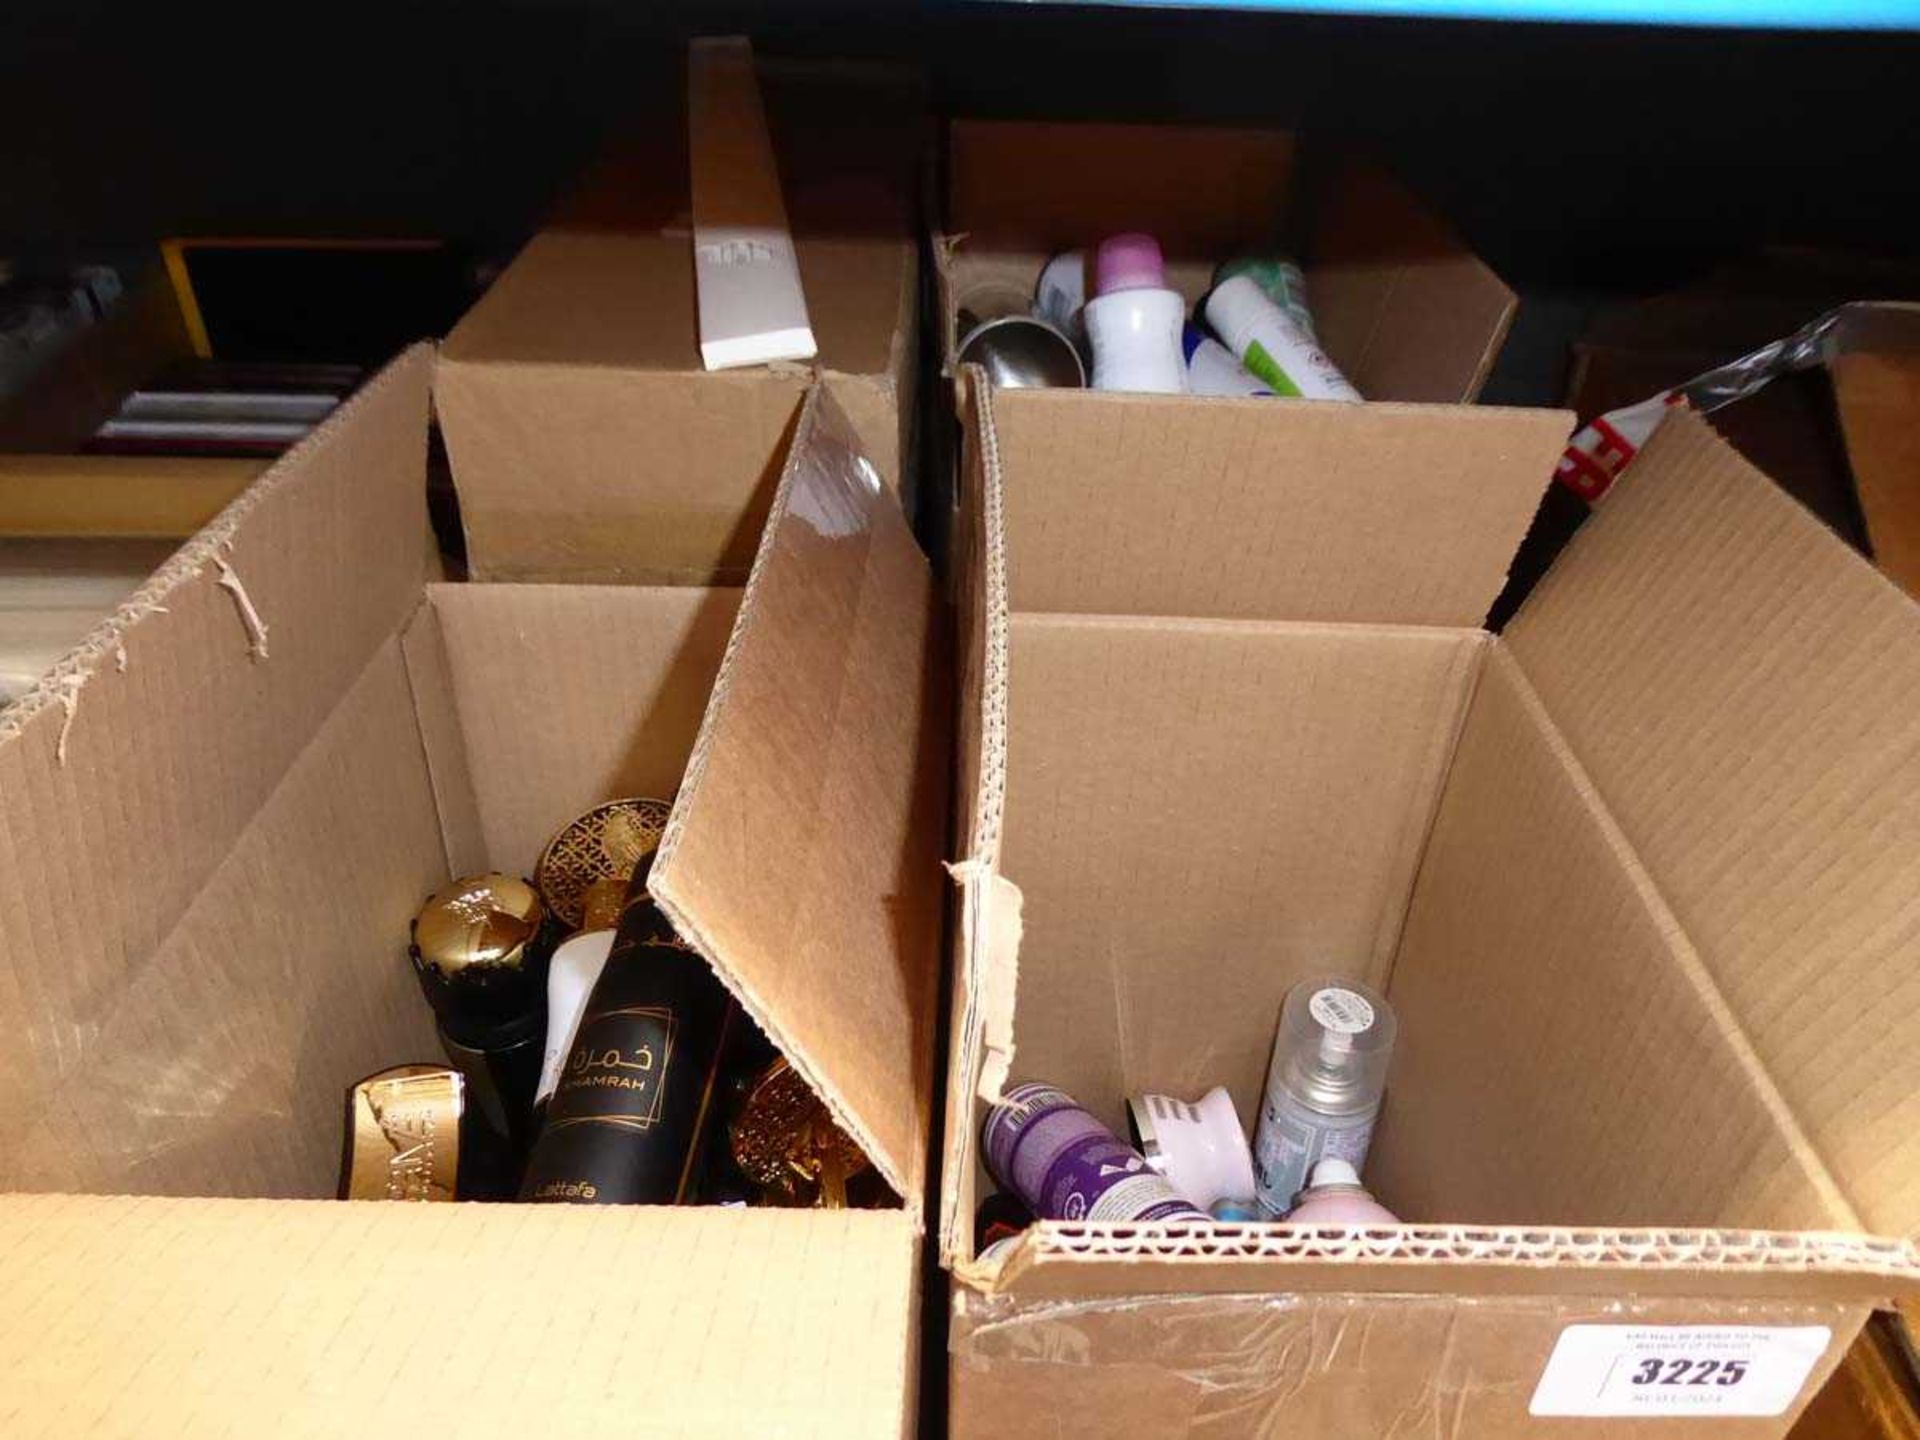 +VAT 3 boxes of various aerosols and sprays, plus another 3 boxes of air fresheners